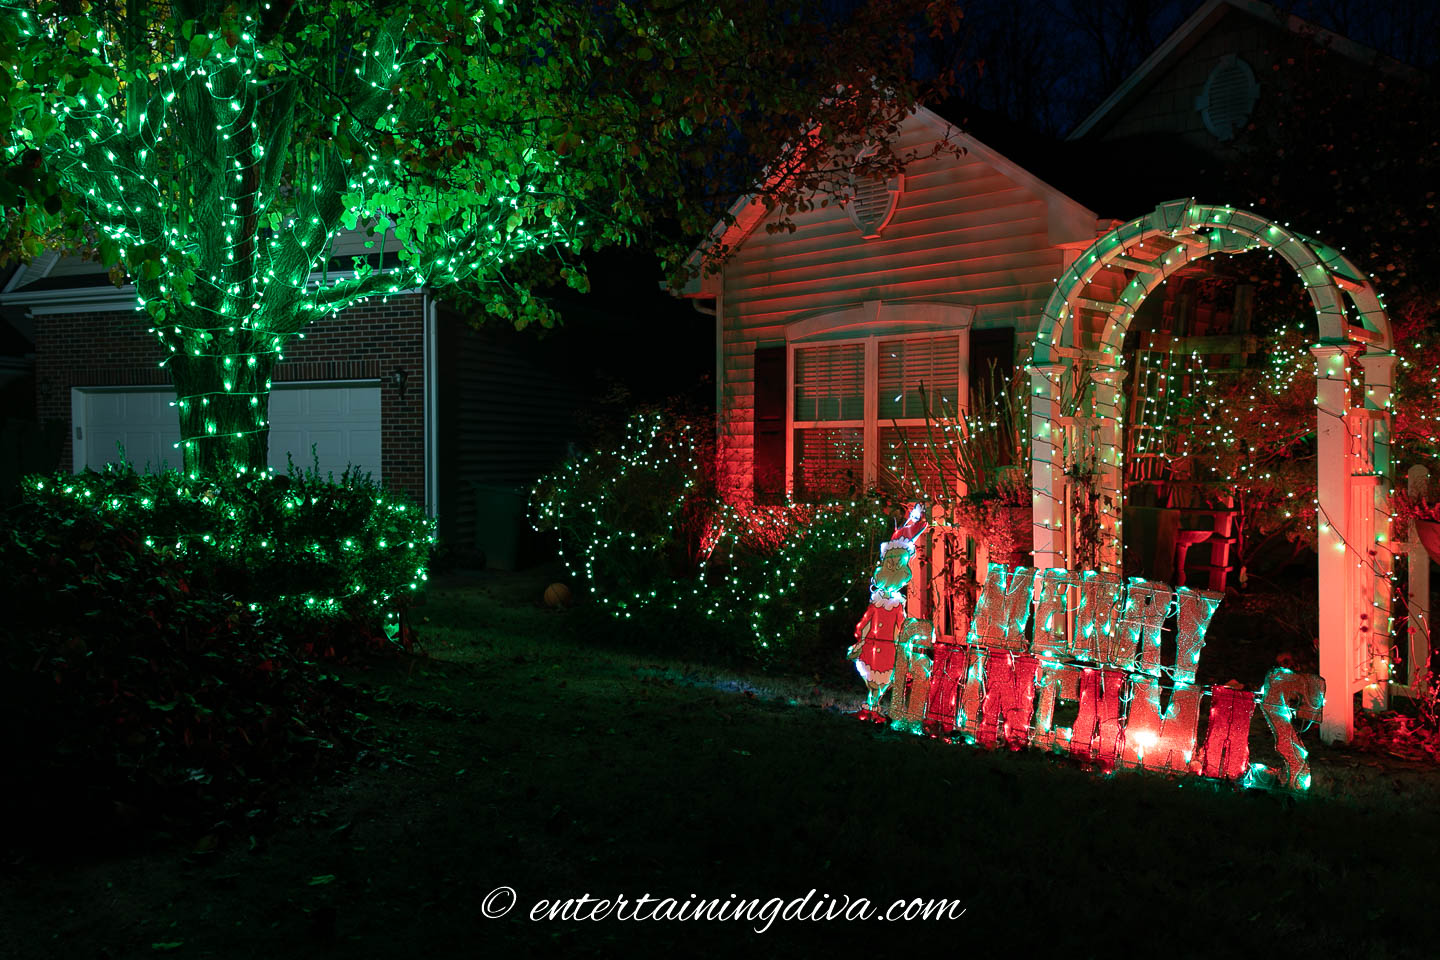 Grinch-inspired outdoor lighting with green lights on the trees and red flood lights